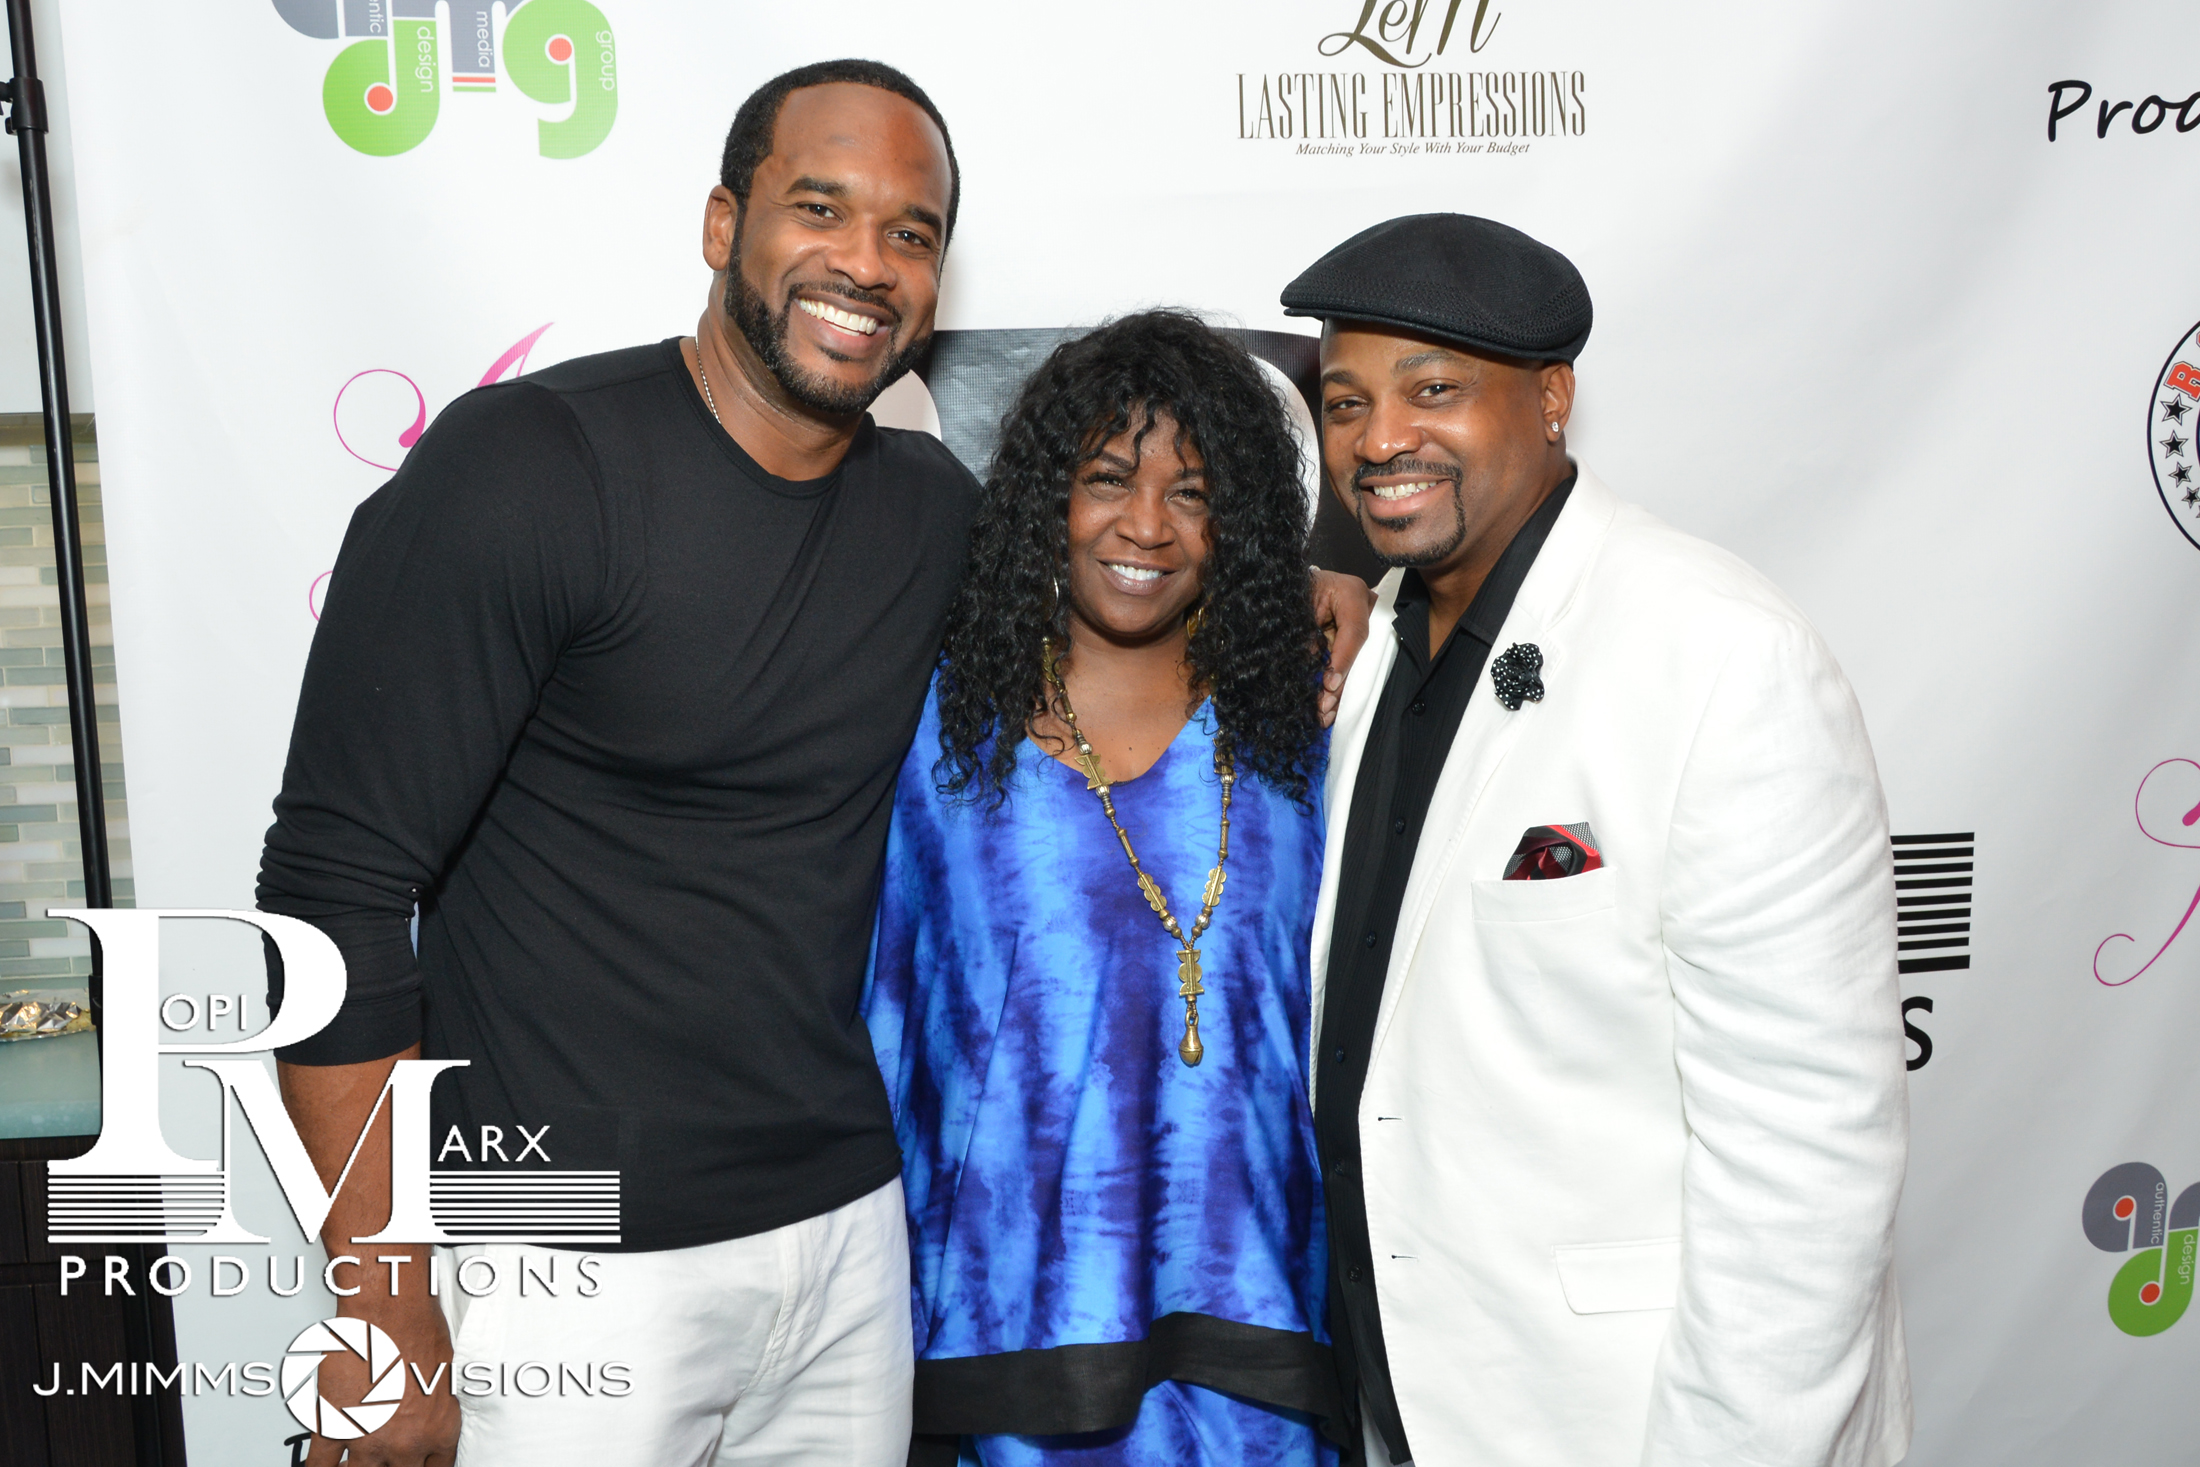 Andre Pitre, Charnele Brown, Marcus Freeman at The Prank movie premiere.